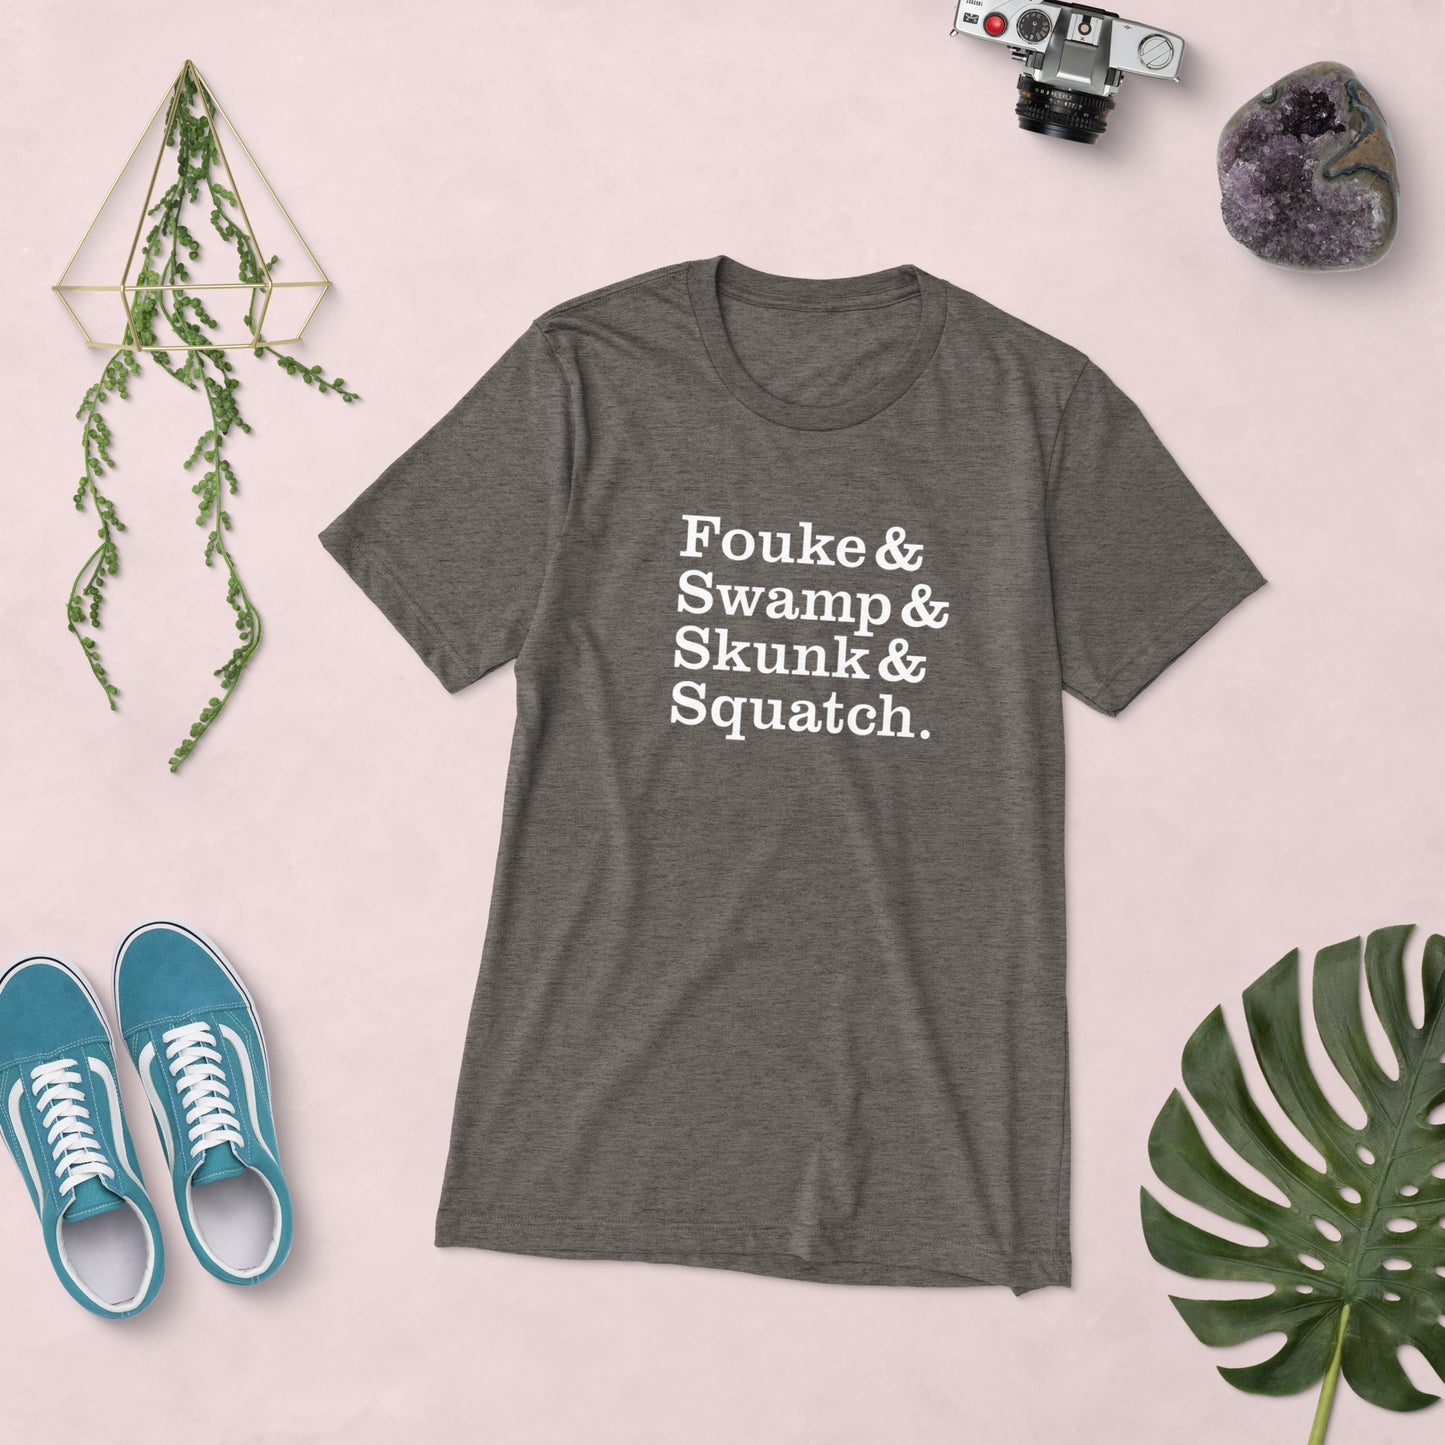 Fouke & Swamp & Skunk & Squatch: Bigfoot of the South T-Shirt